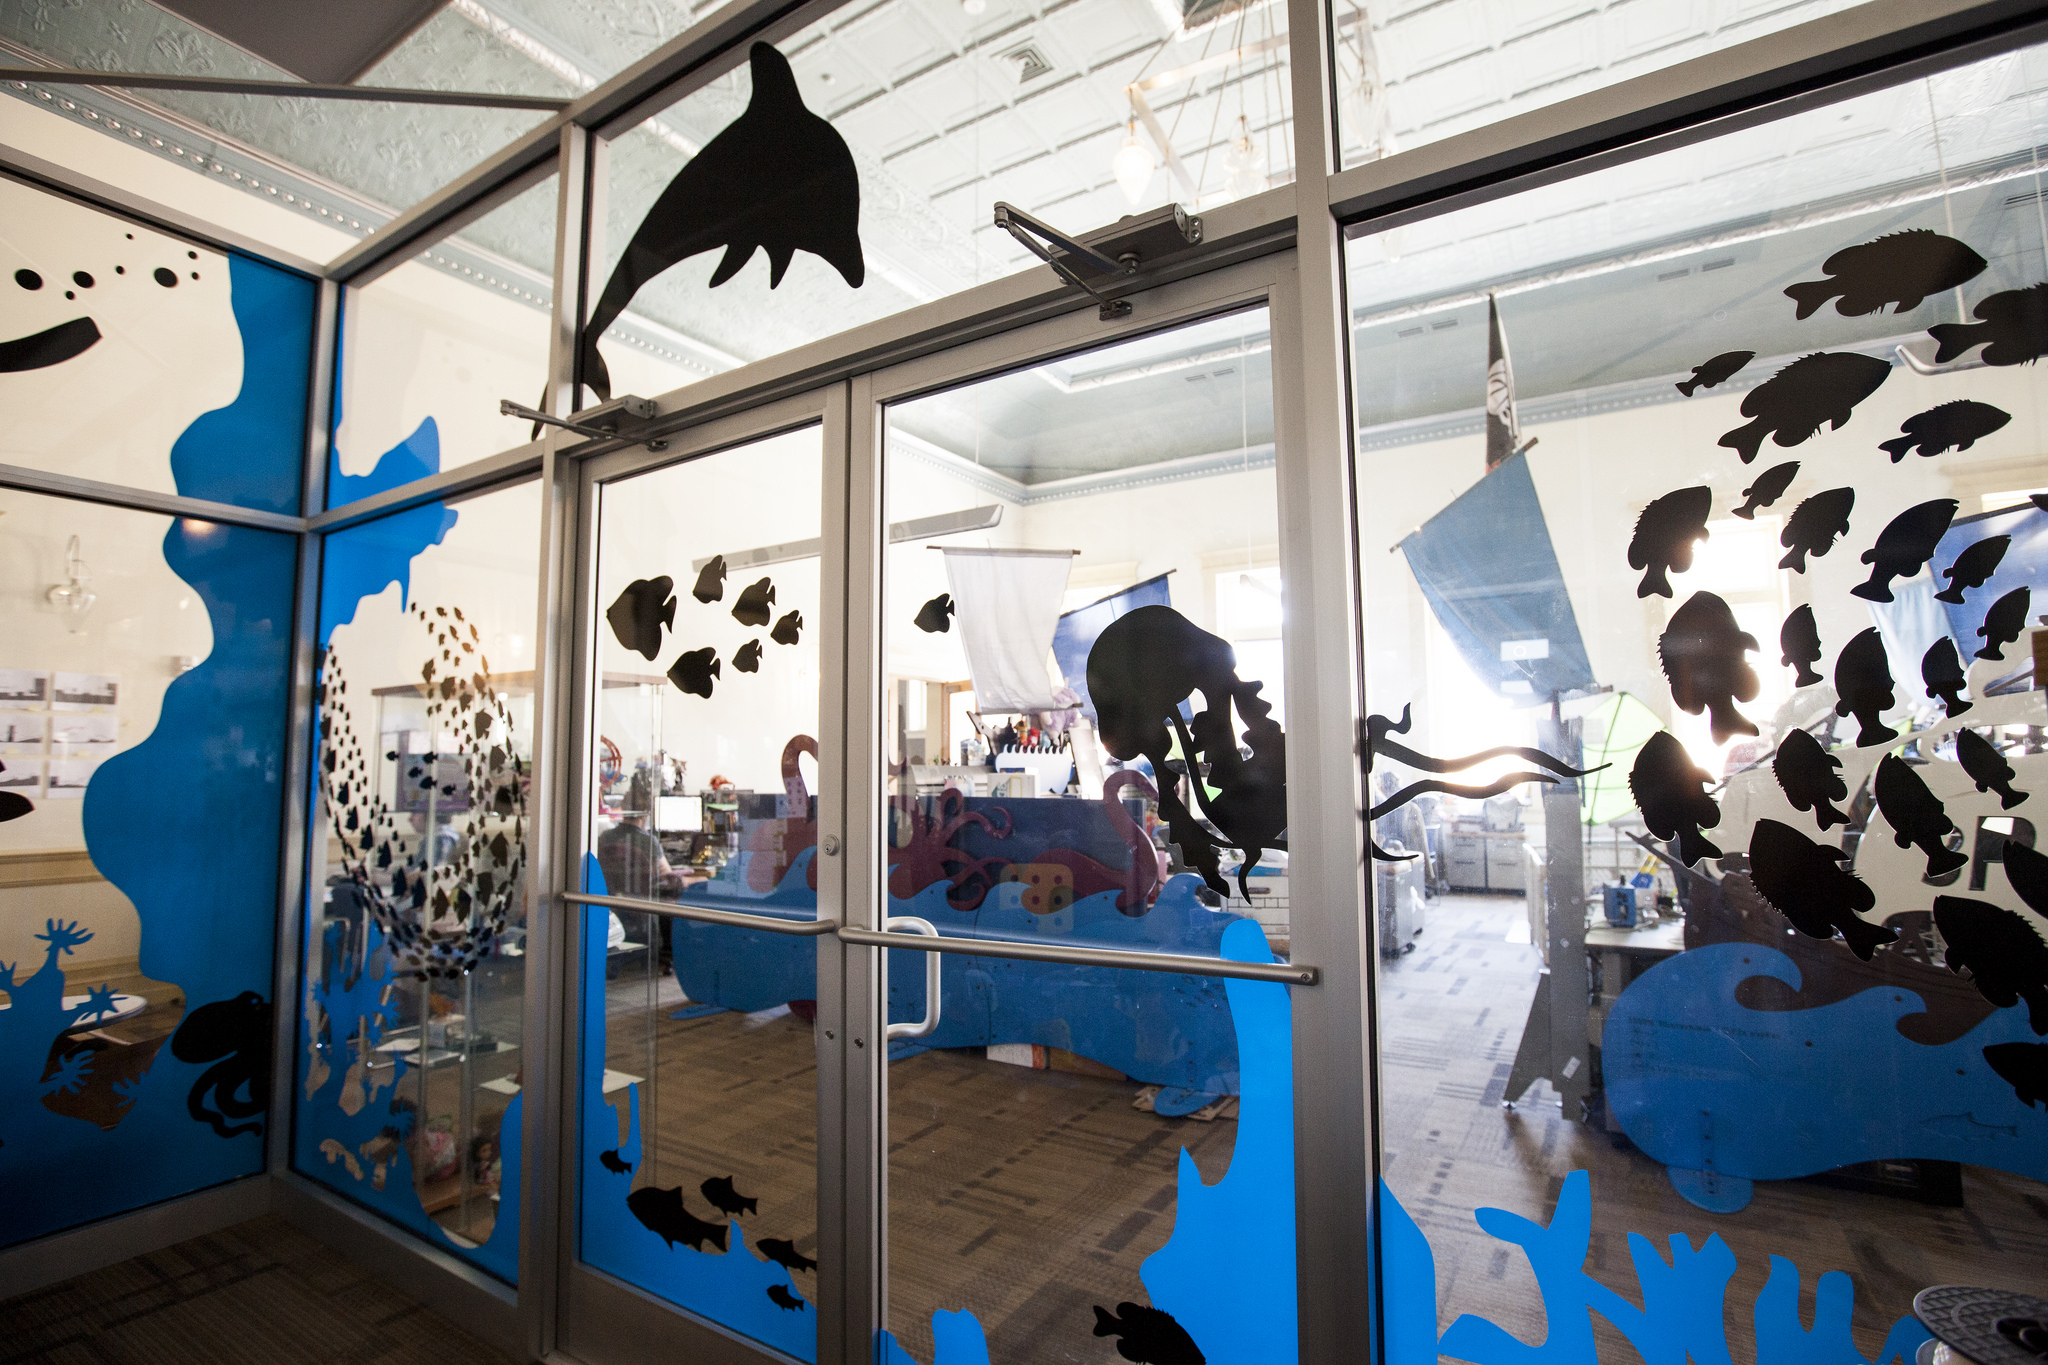  In the center of the open office stands a meeting room with all glass walls that was referred to as 'the fish tank'. We playfully covered it with an under water theme of fish, coral and divers. The vinyl application adds a need privacy to the meetin